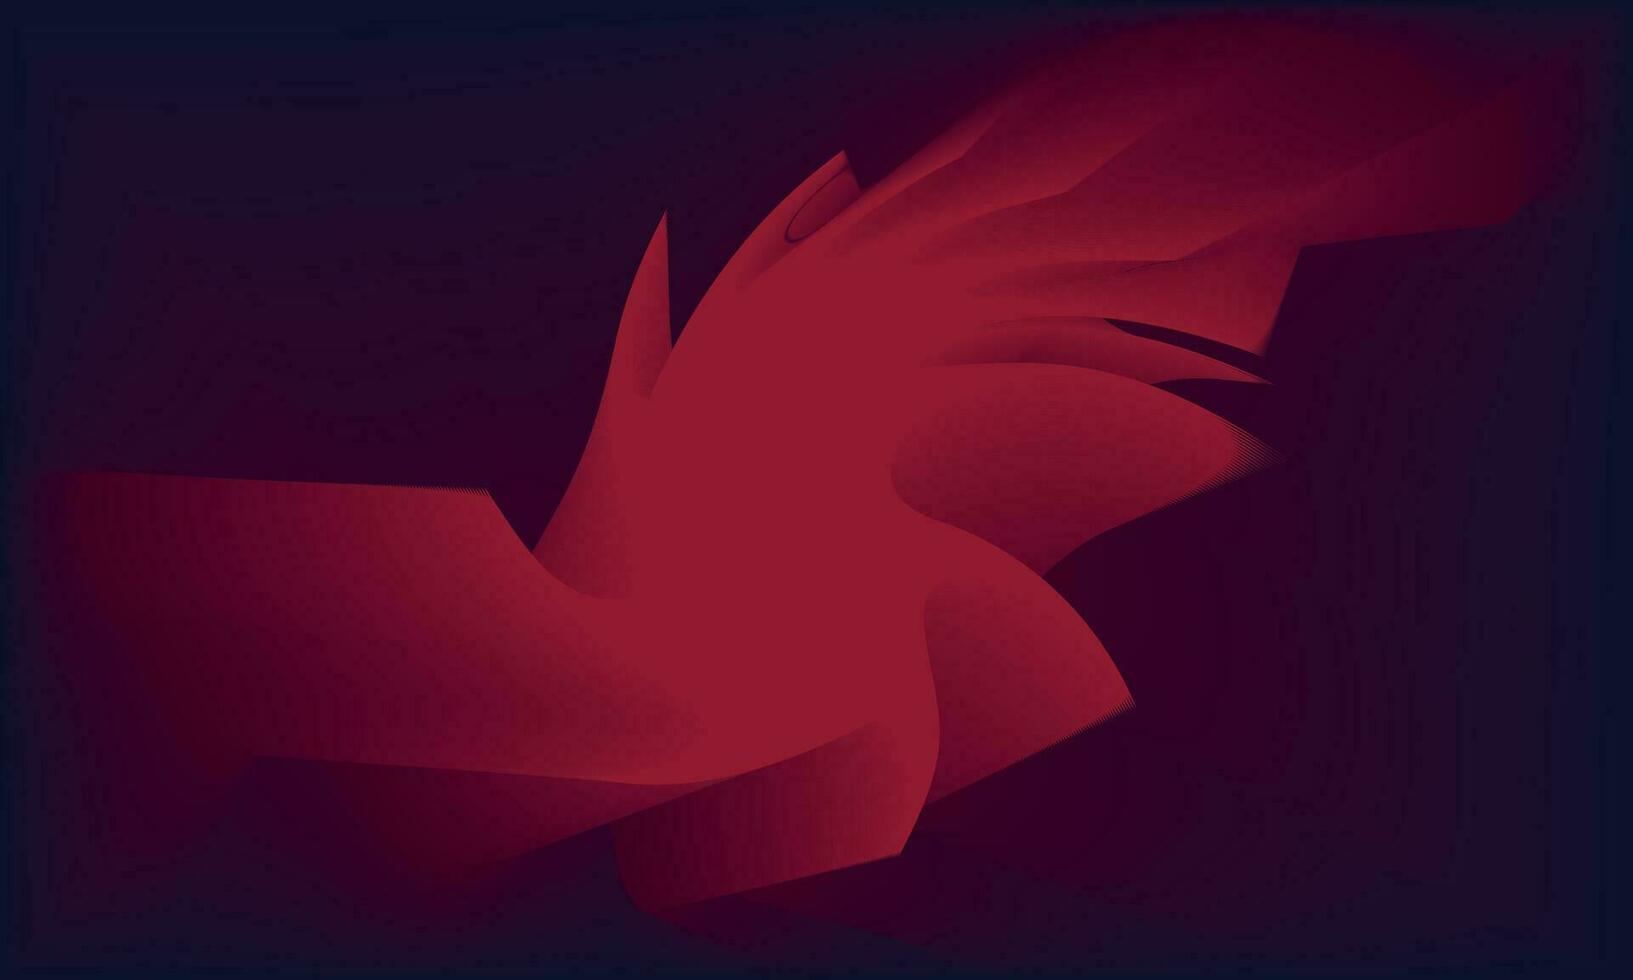 a red bird with a dark background, abstract red background illustration, a red light beam is shining on a black background, a red abstract shape with a curved line background , wallpaper, vector